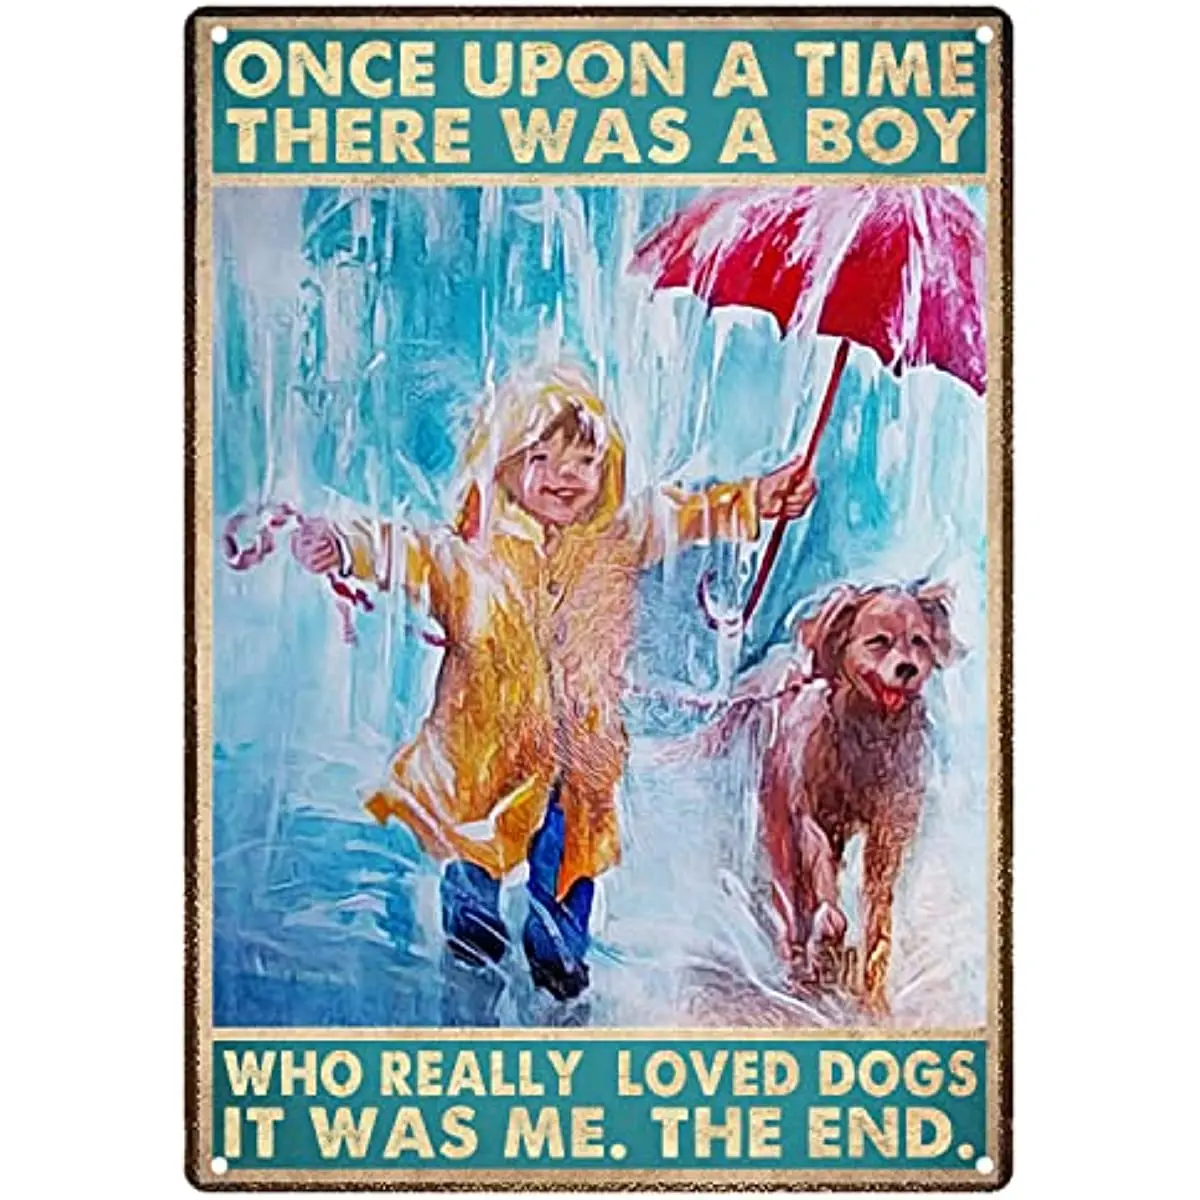 

Once Upon A Time There Was A Boy Who Really Loved Dogs Sign Metal Tin Signs Running In Rain Art Poster for Bedroom 8x12 Inch